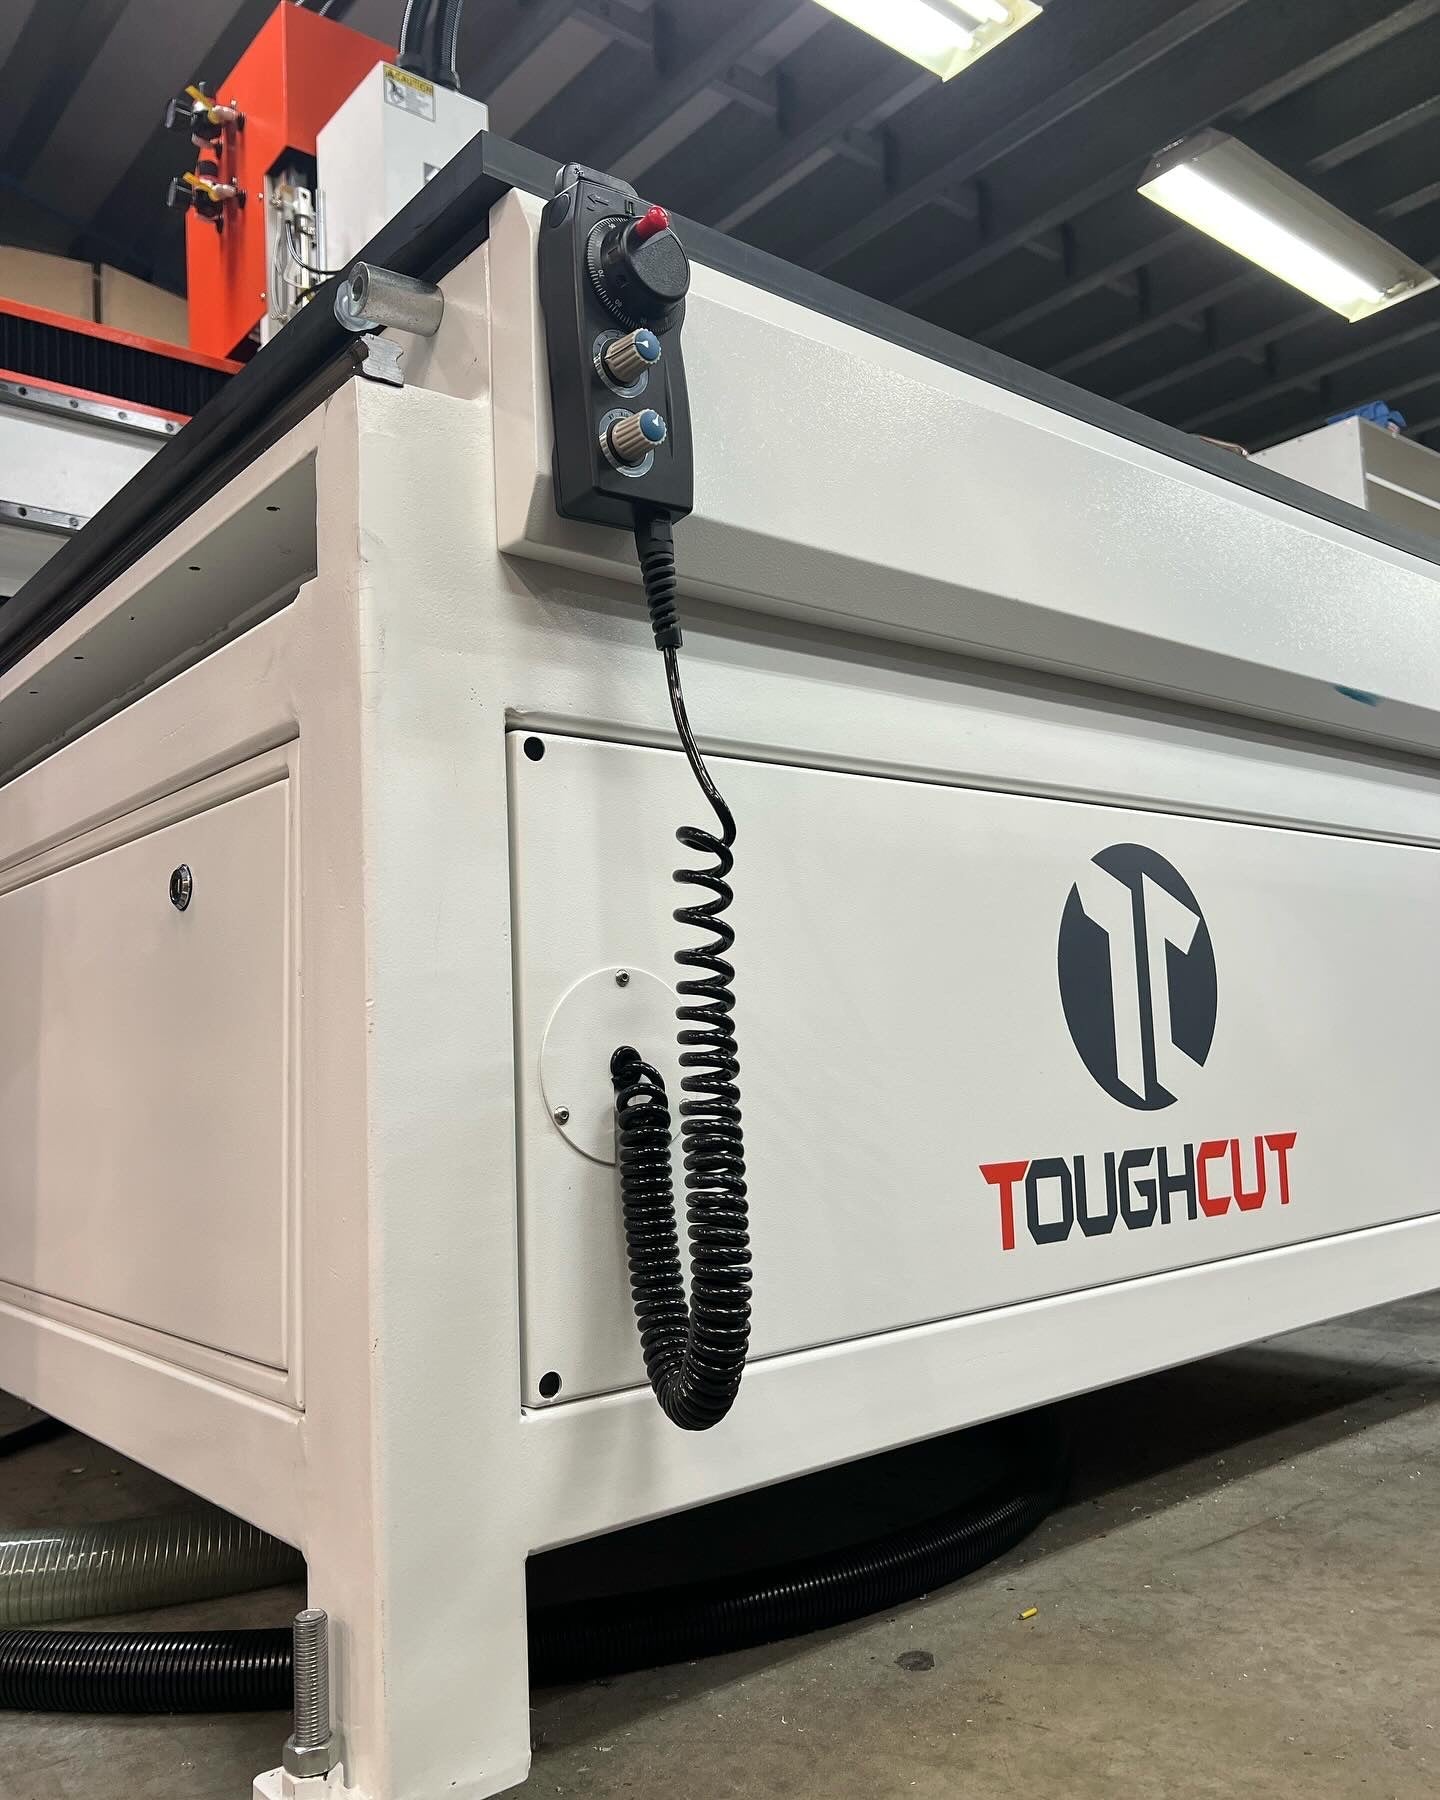 1200mm x 1200mm CNC Router with Auto Tool Change 415V SAPPHIRE TCAKM1212VC by Toughcut